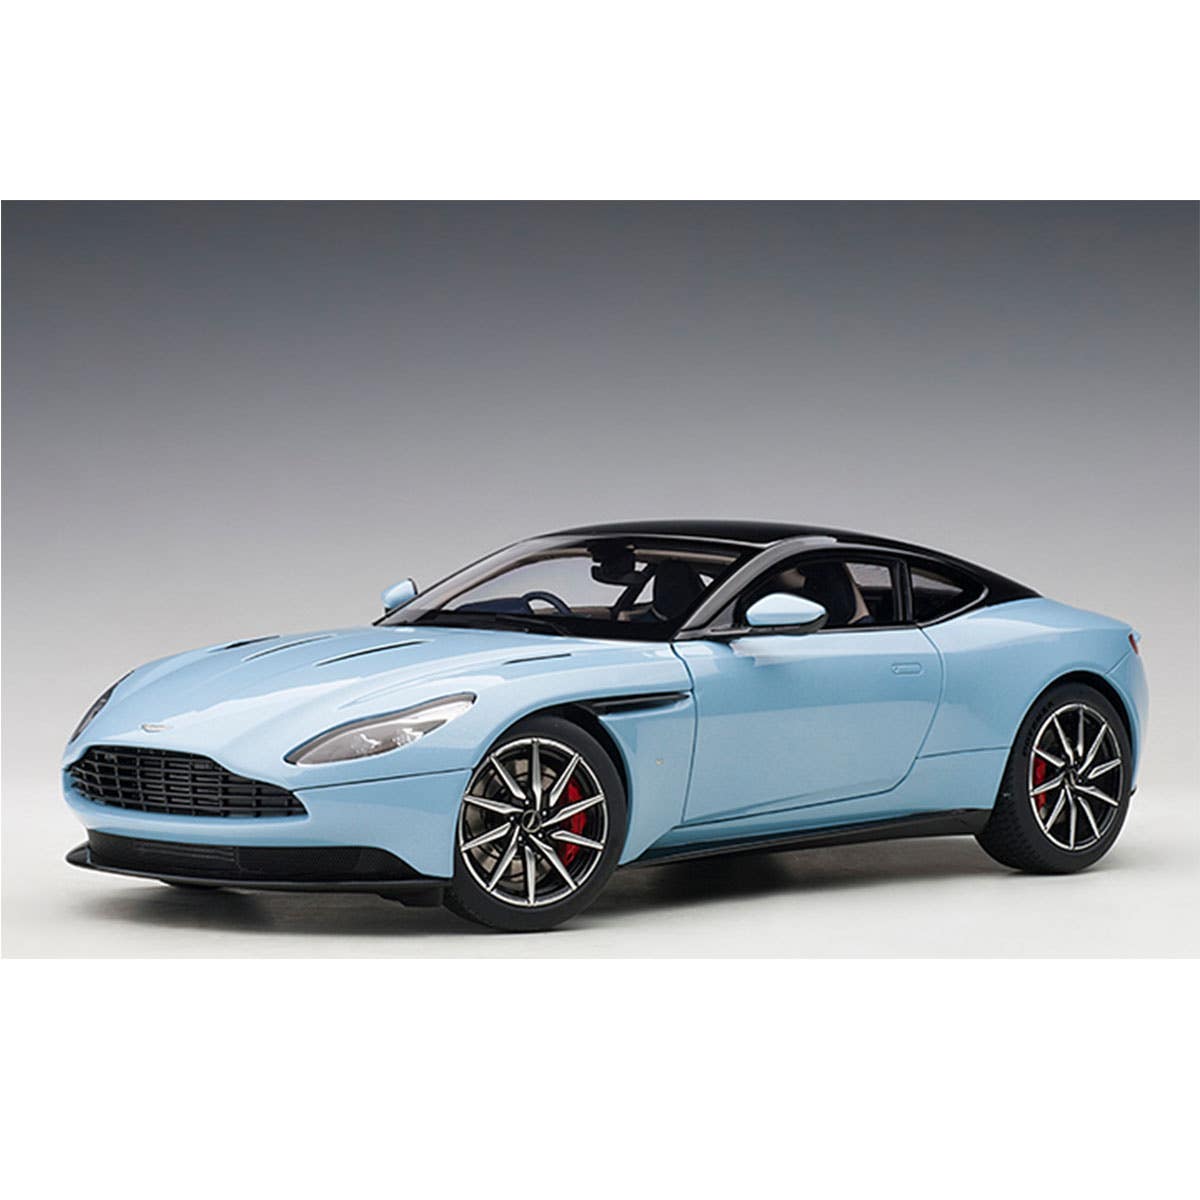 ASTON MARTIN DB11 (FROSTED GLASS BLUE ) - 1:18 Scale Composite Model Car